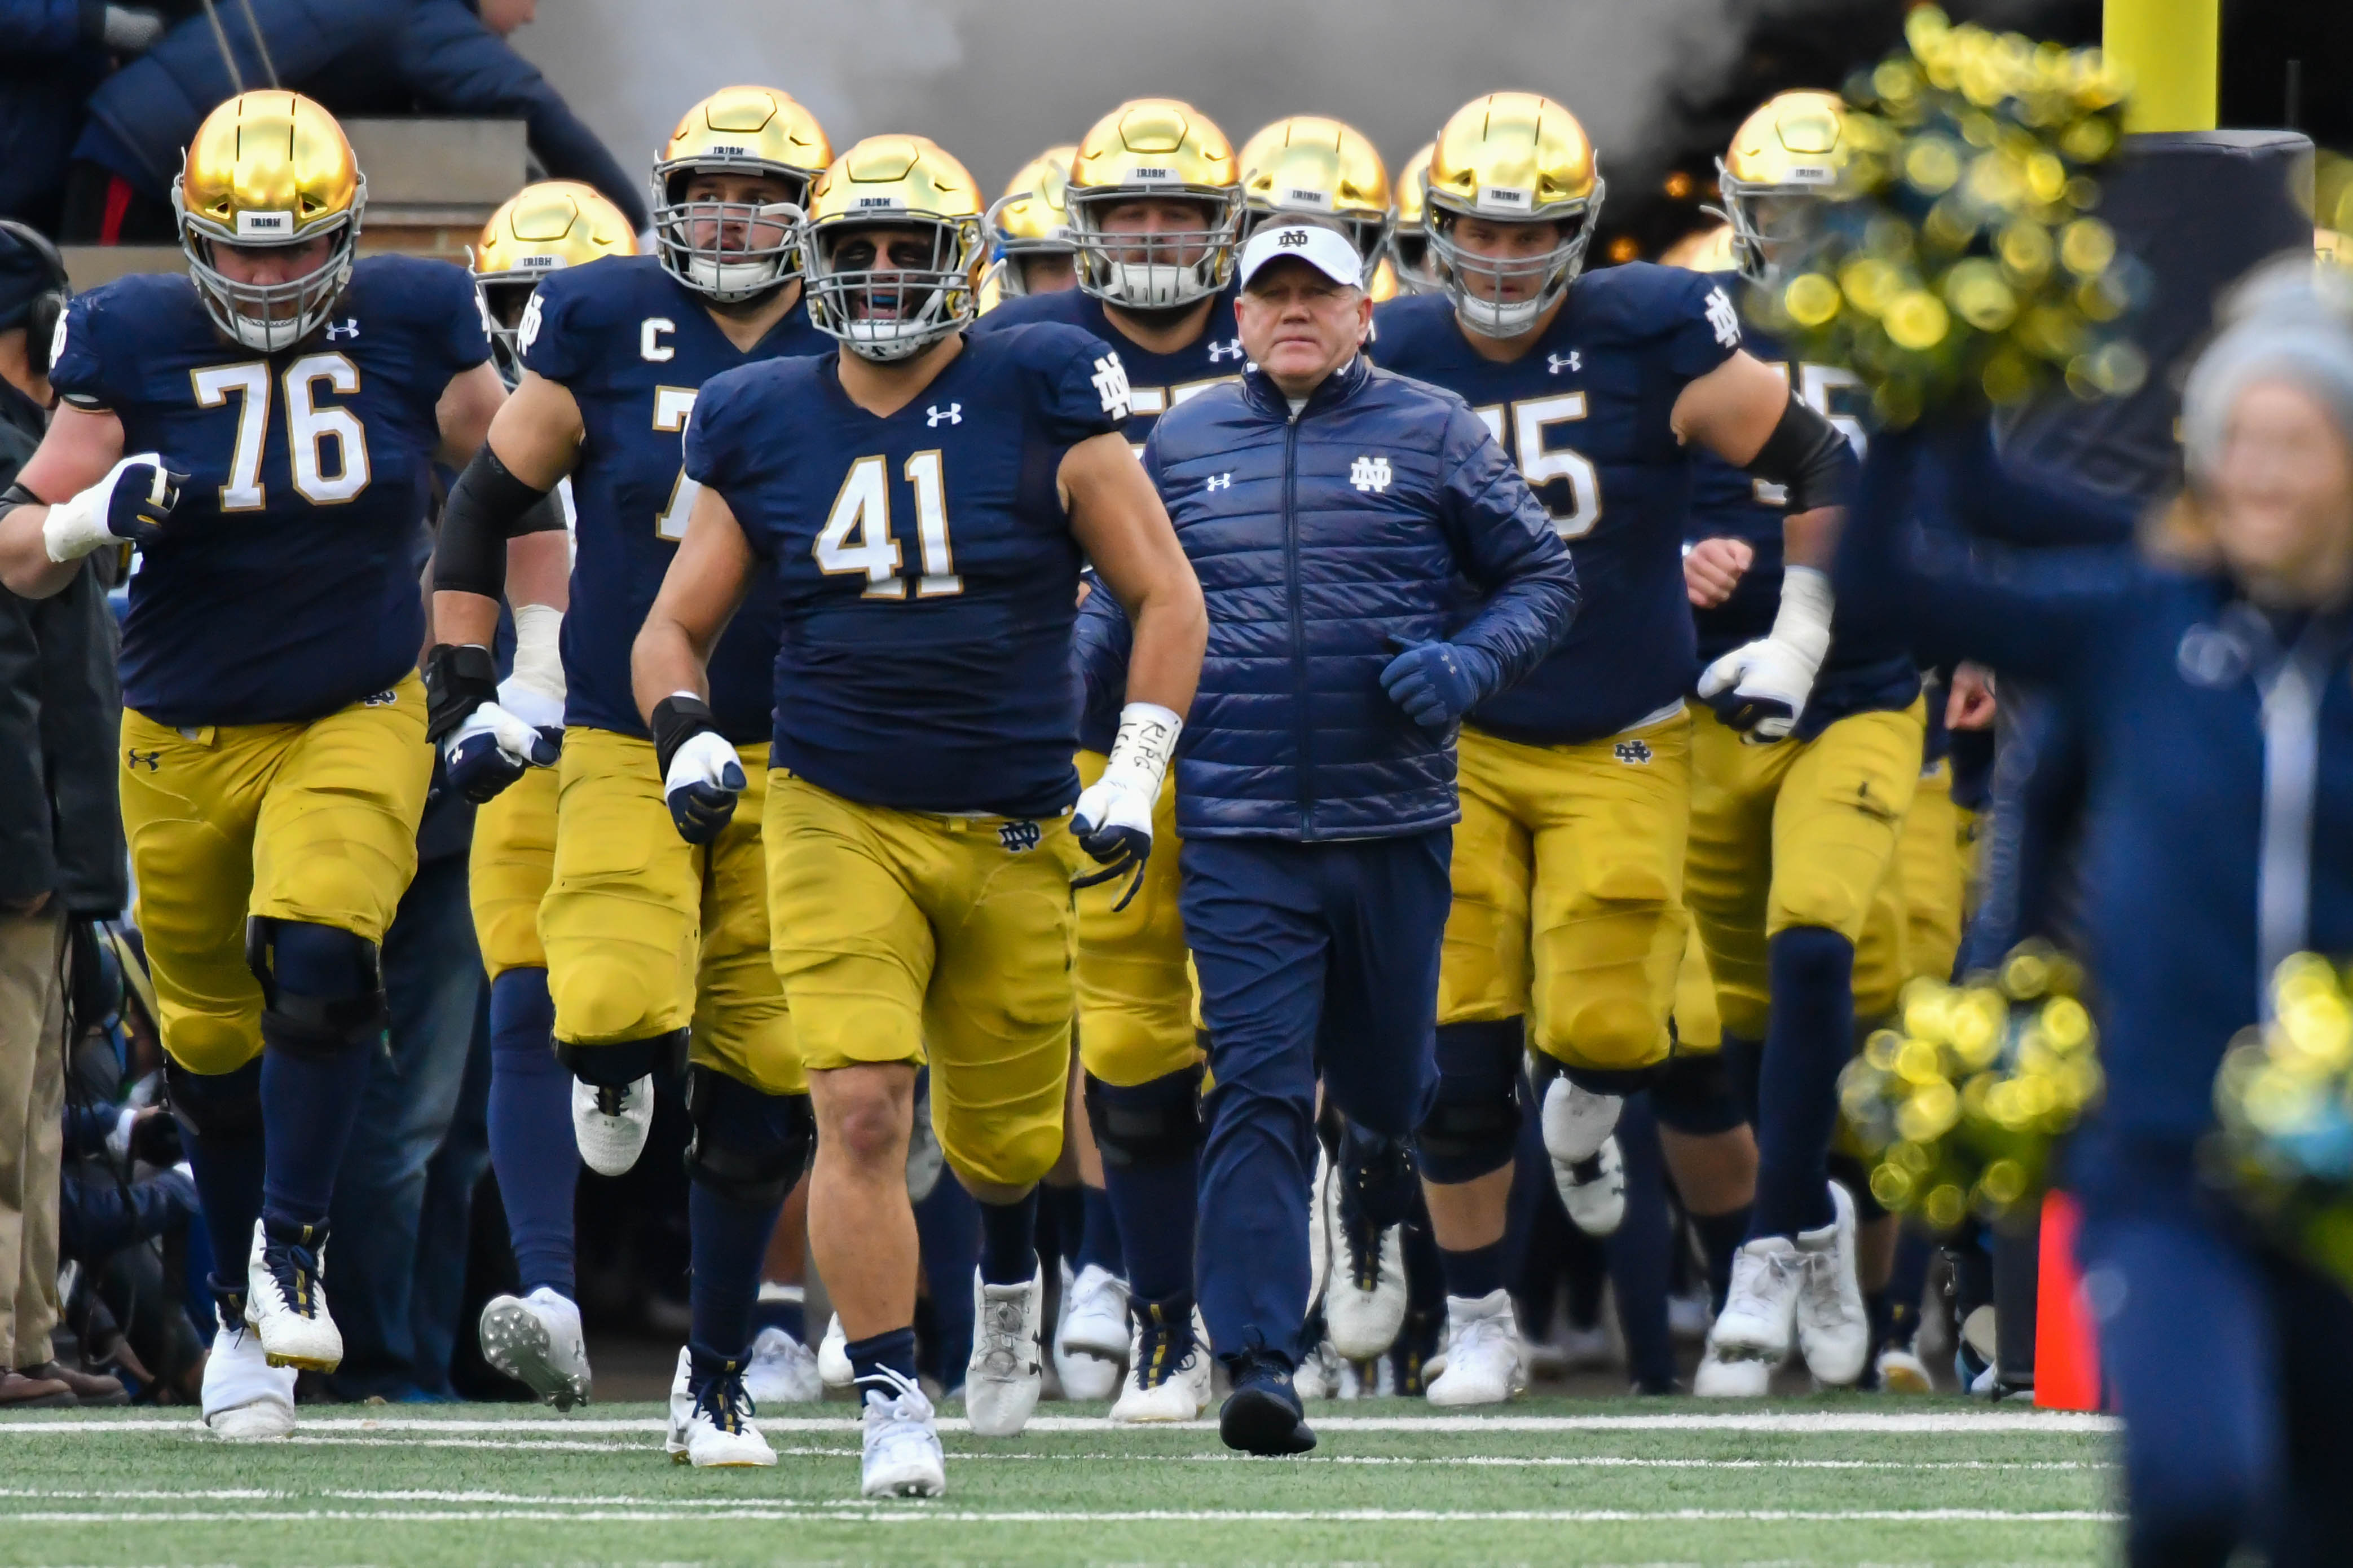 Notre Dame Ranked No. 15 In Initial College Football Playoff Ranking